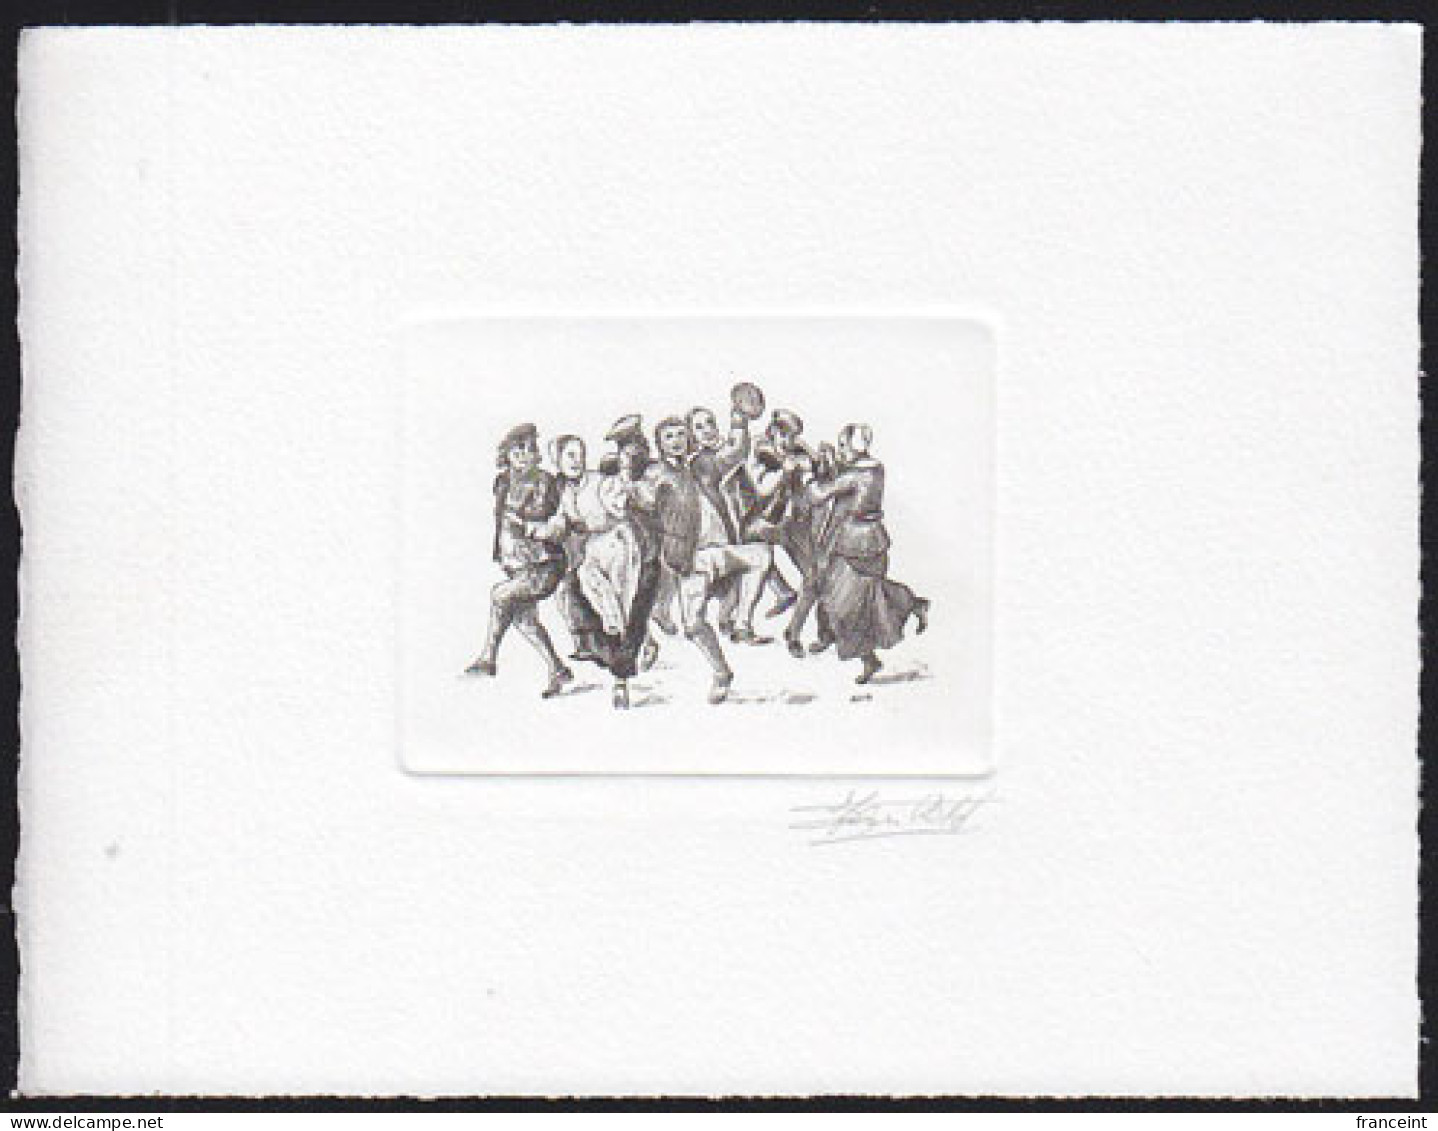 BELGIUM(1990) Dancers. Die Proof In Black Signed By The Engraver, Representing The FDC Cachet. Scott No 1391. - Proeven & Herdruk